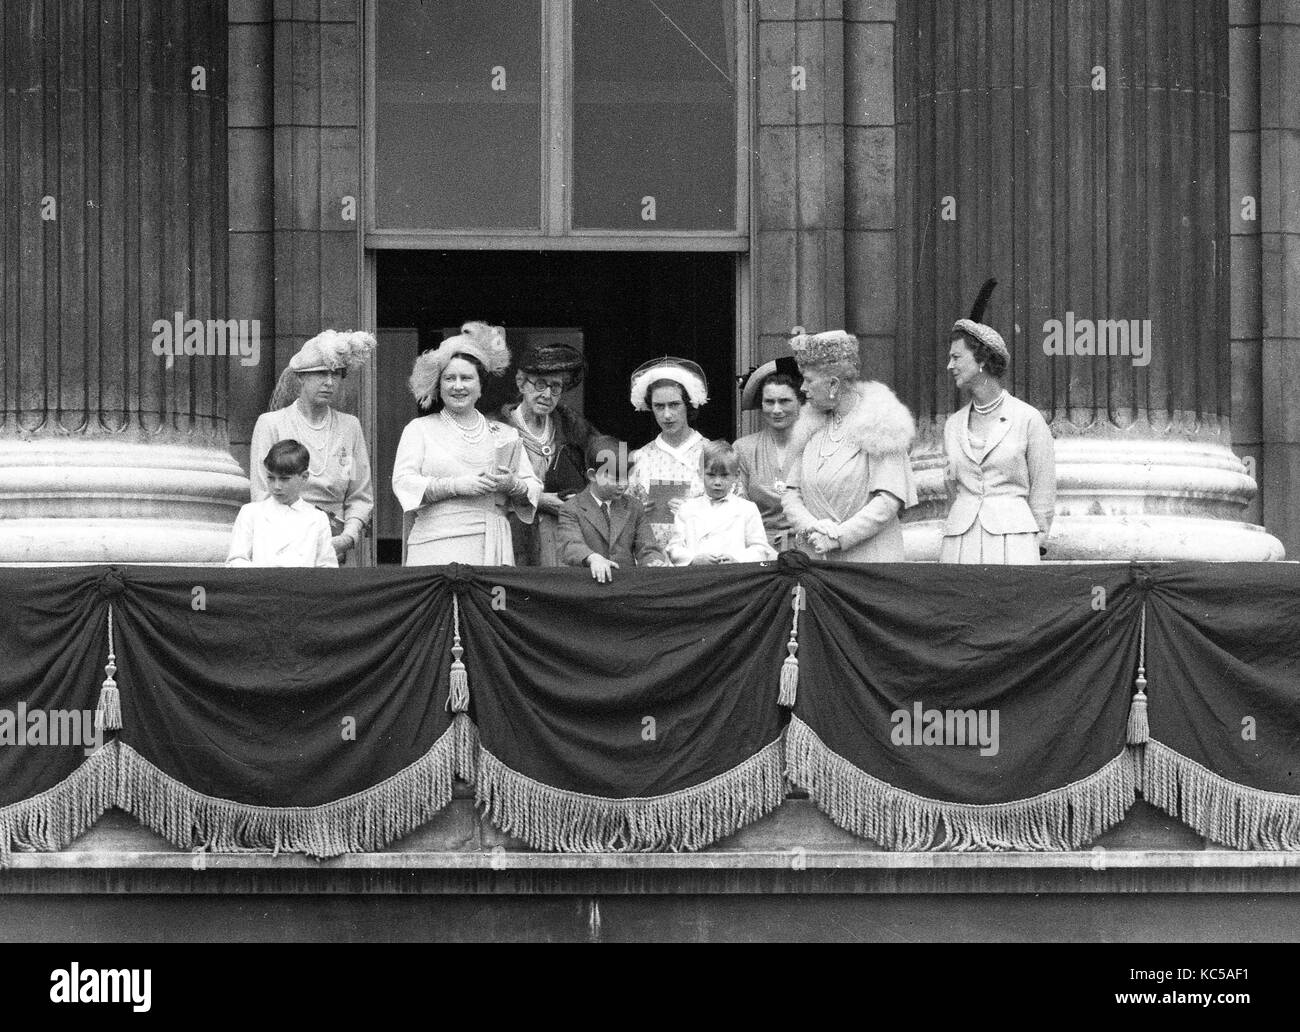 Royal family on the balcony of Buckingham Palace including Queen Elizabeth the Queen Mother, Princess Marie Louise (grand daughter of Queen Victoria), Princess Margaret, Queen Mary, Duchess of Gloucester. The children are Prince Richard, Prince William, Prince Michael of Kent June 9th 1949 Stock Photo